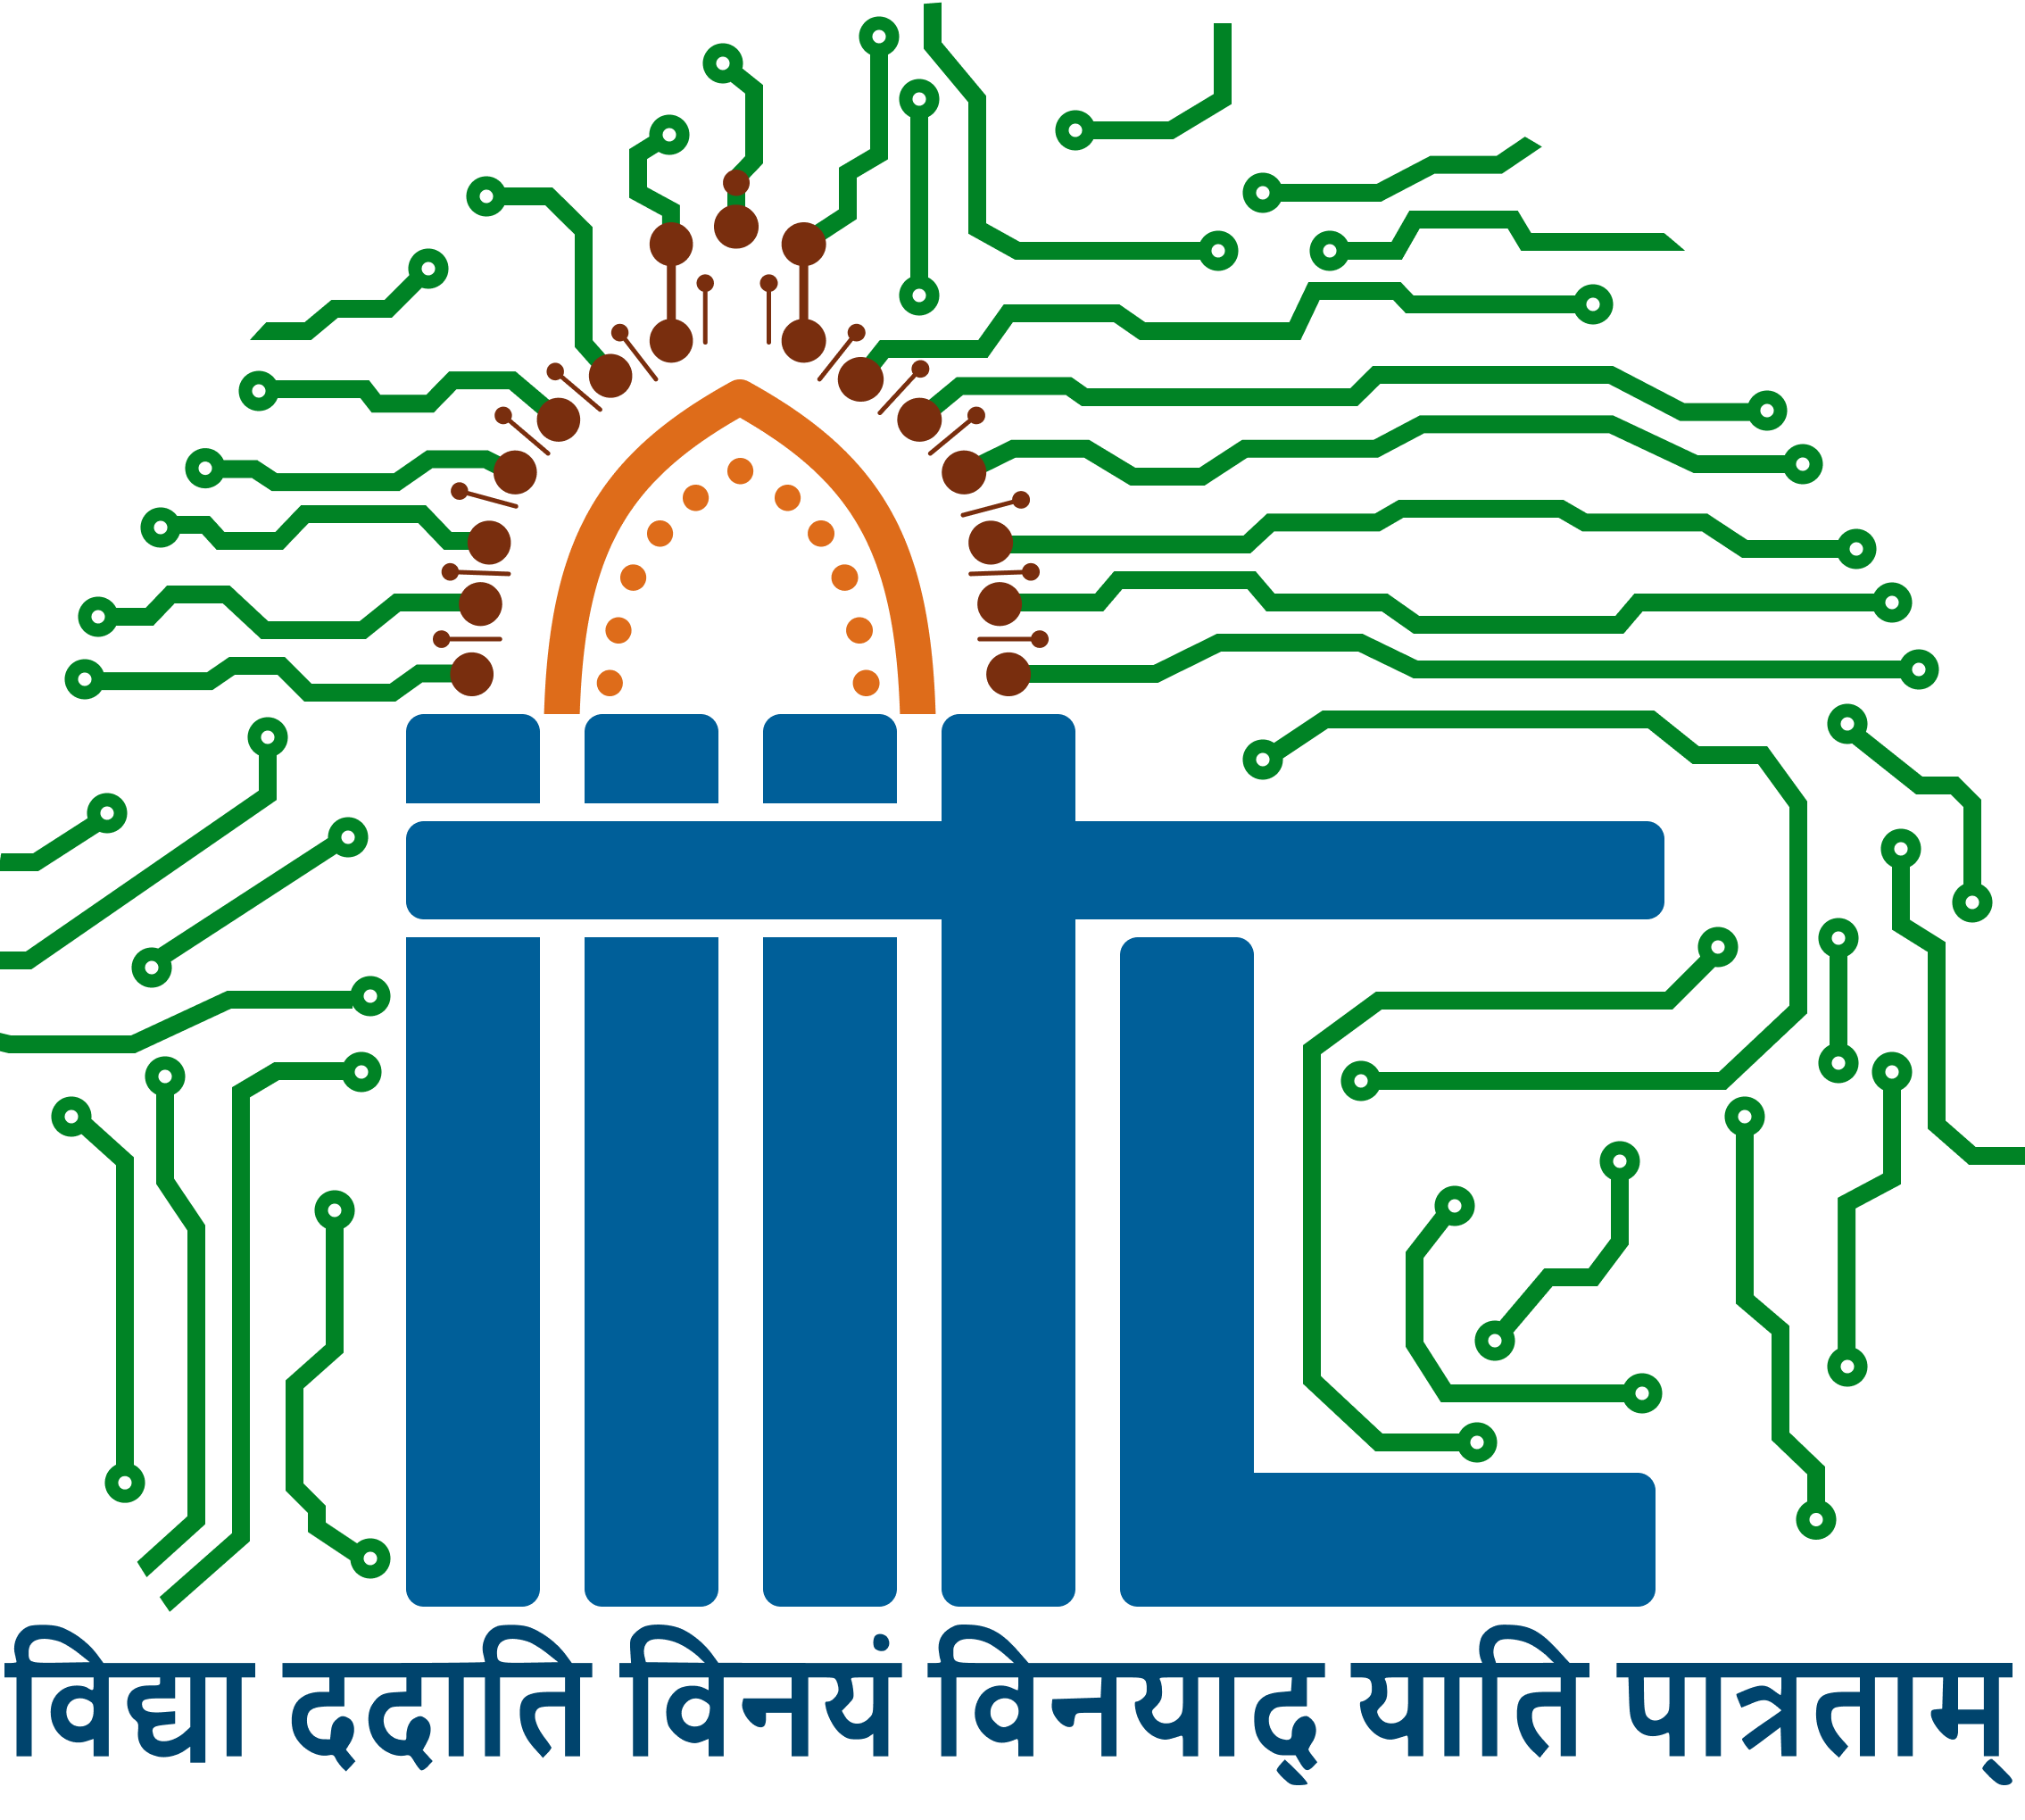 Indian Institute of Information Technology, Lucknow logo